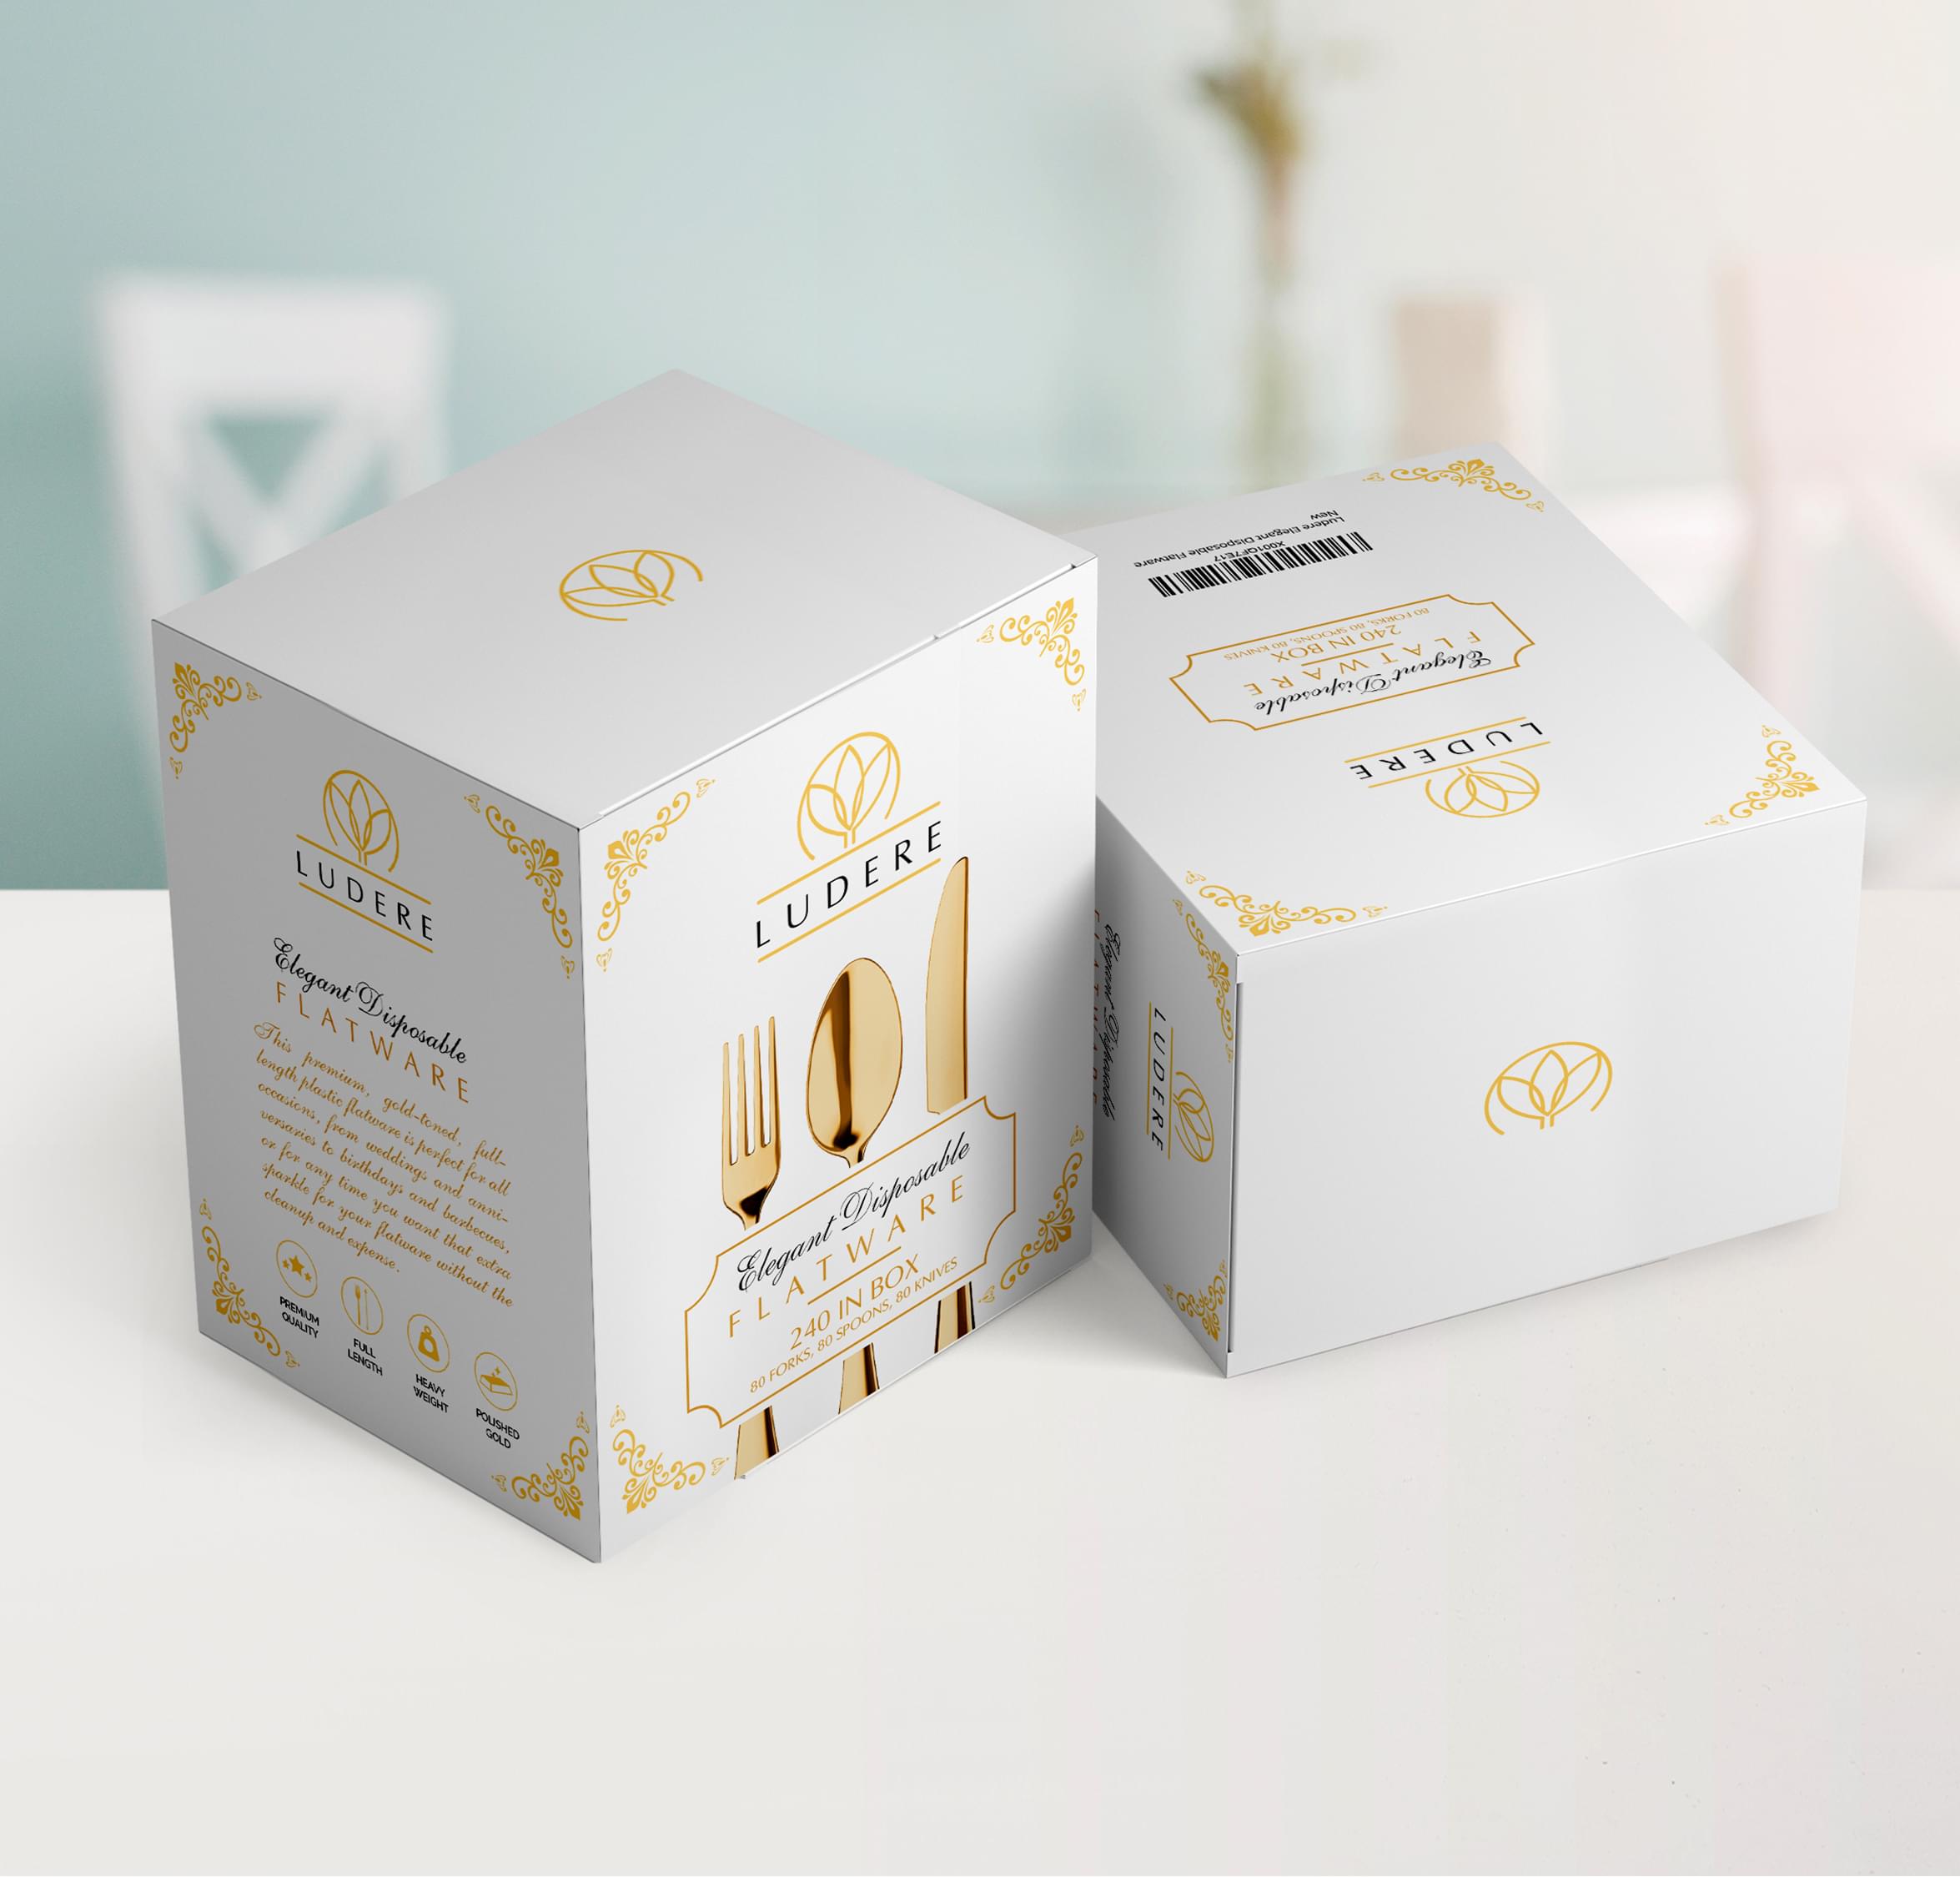 Ludere Packaging